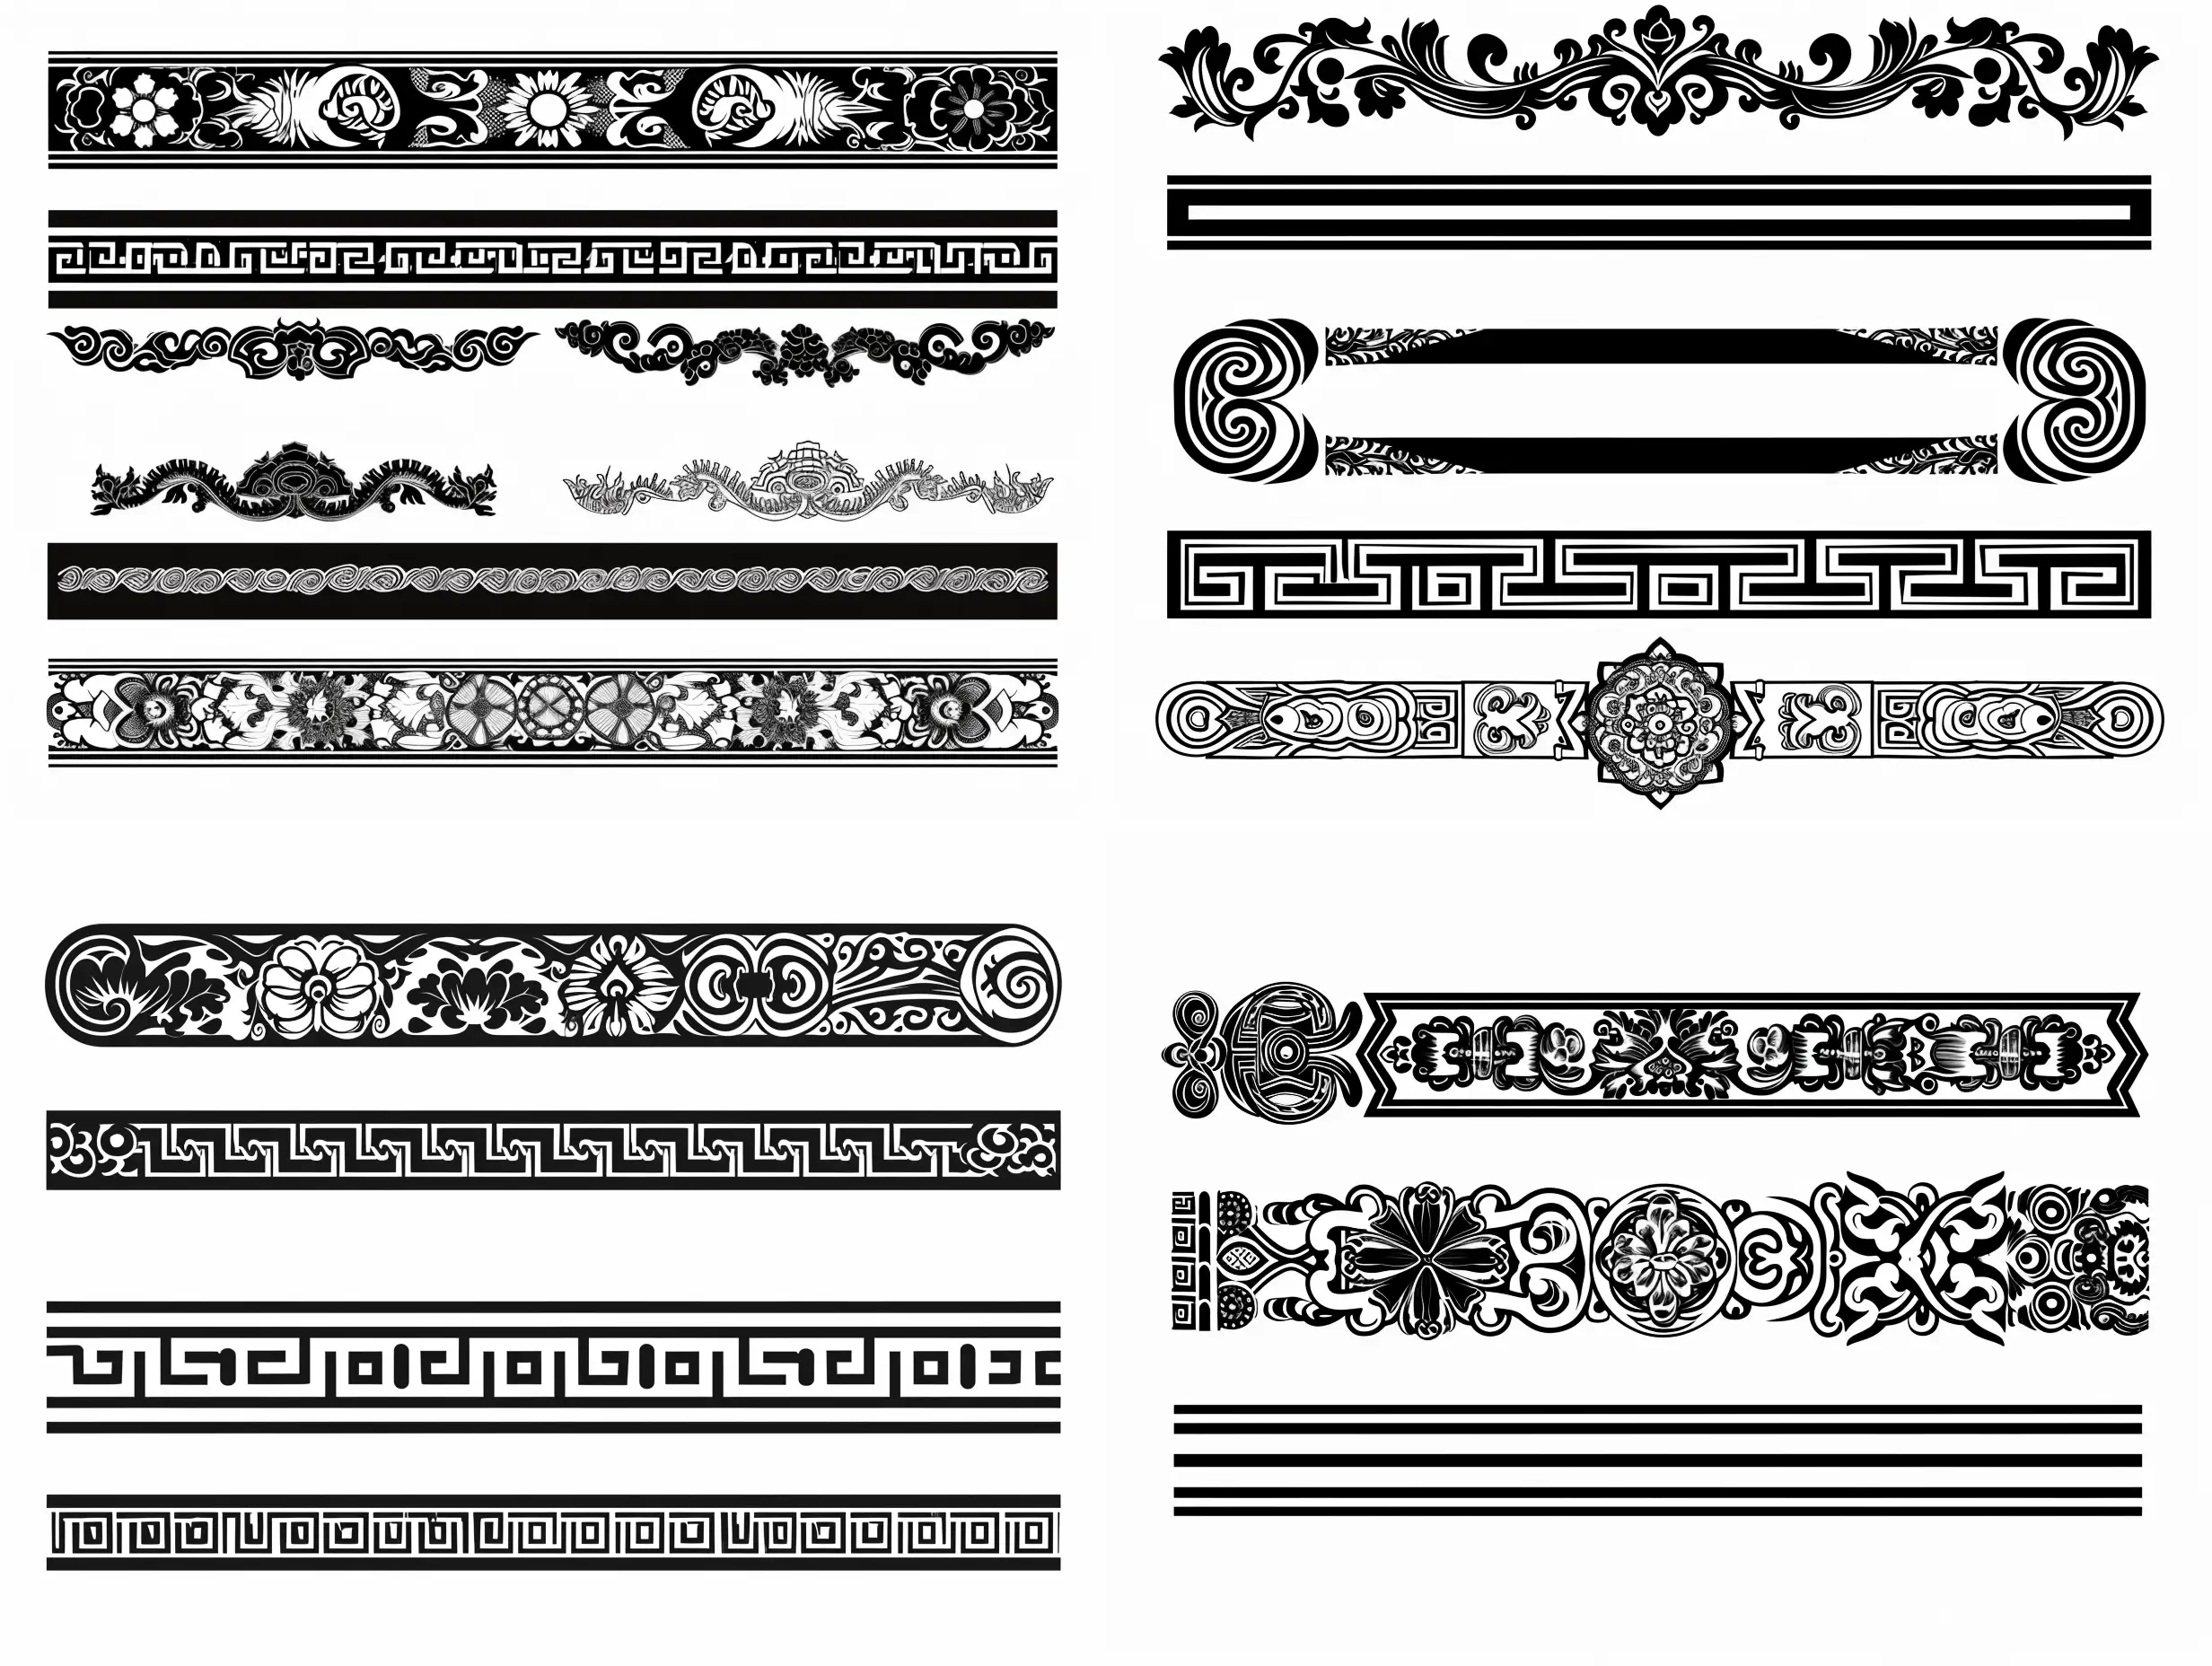 Ancient-Chinese-Ornament-Variants-Vector-Linear-Stylized-Caricature-Decorative-Flat-Drawing